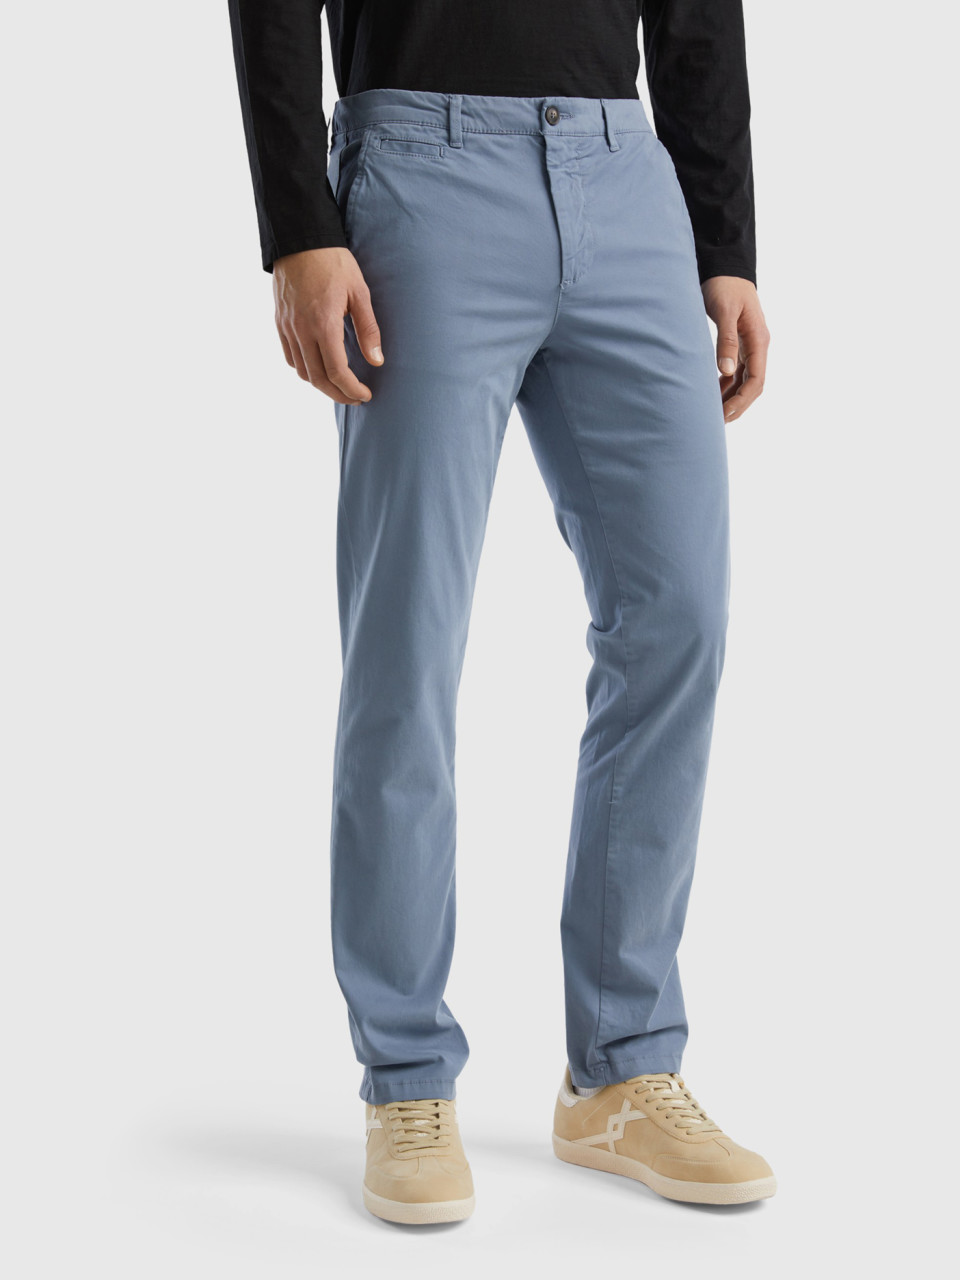 Benetton, Chinos Slim Fit Azules, Azul Grisáceo, Hombre